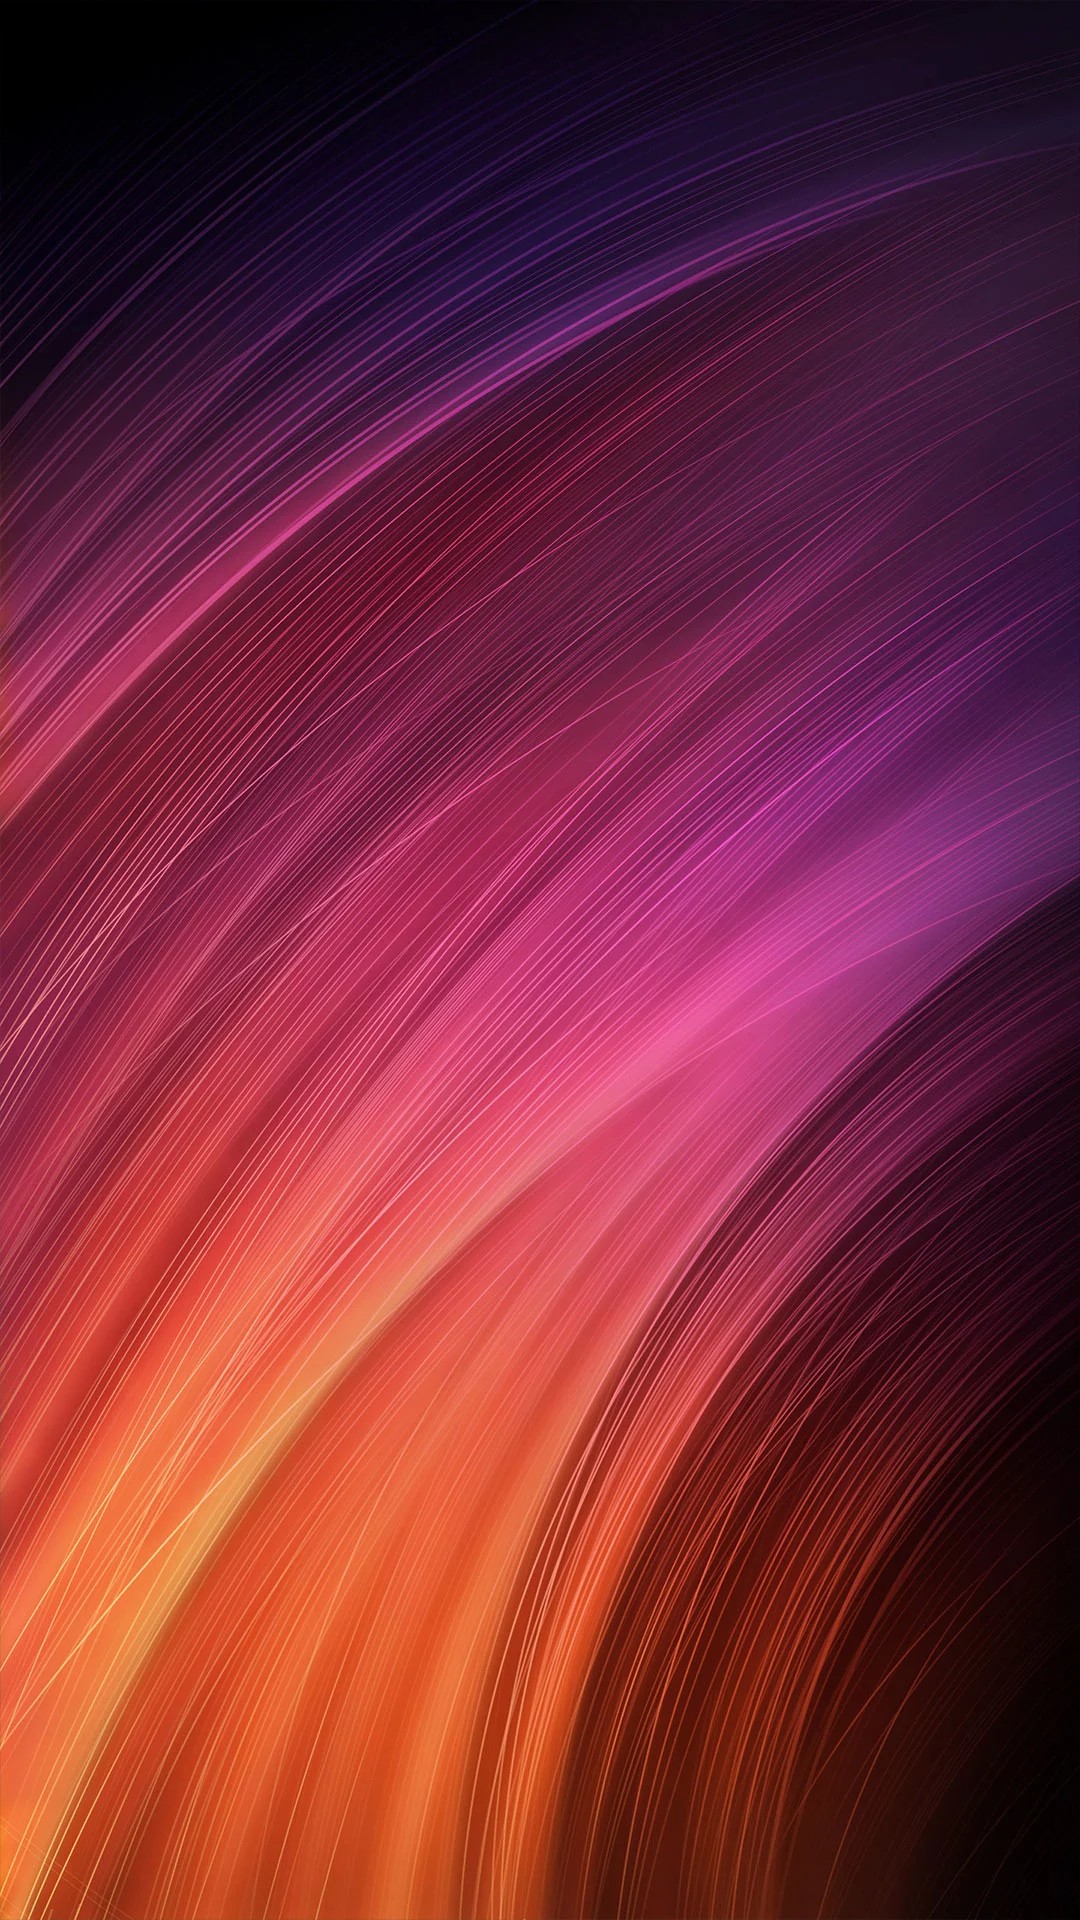 Download Redmi Note 8 Pro Wallpapers in HD Quality  Gizmochina